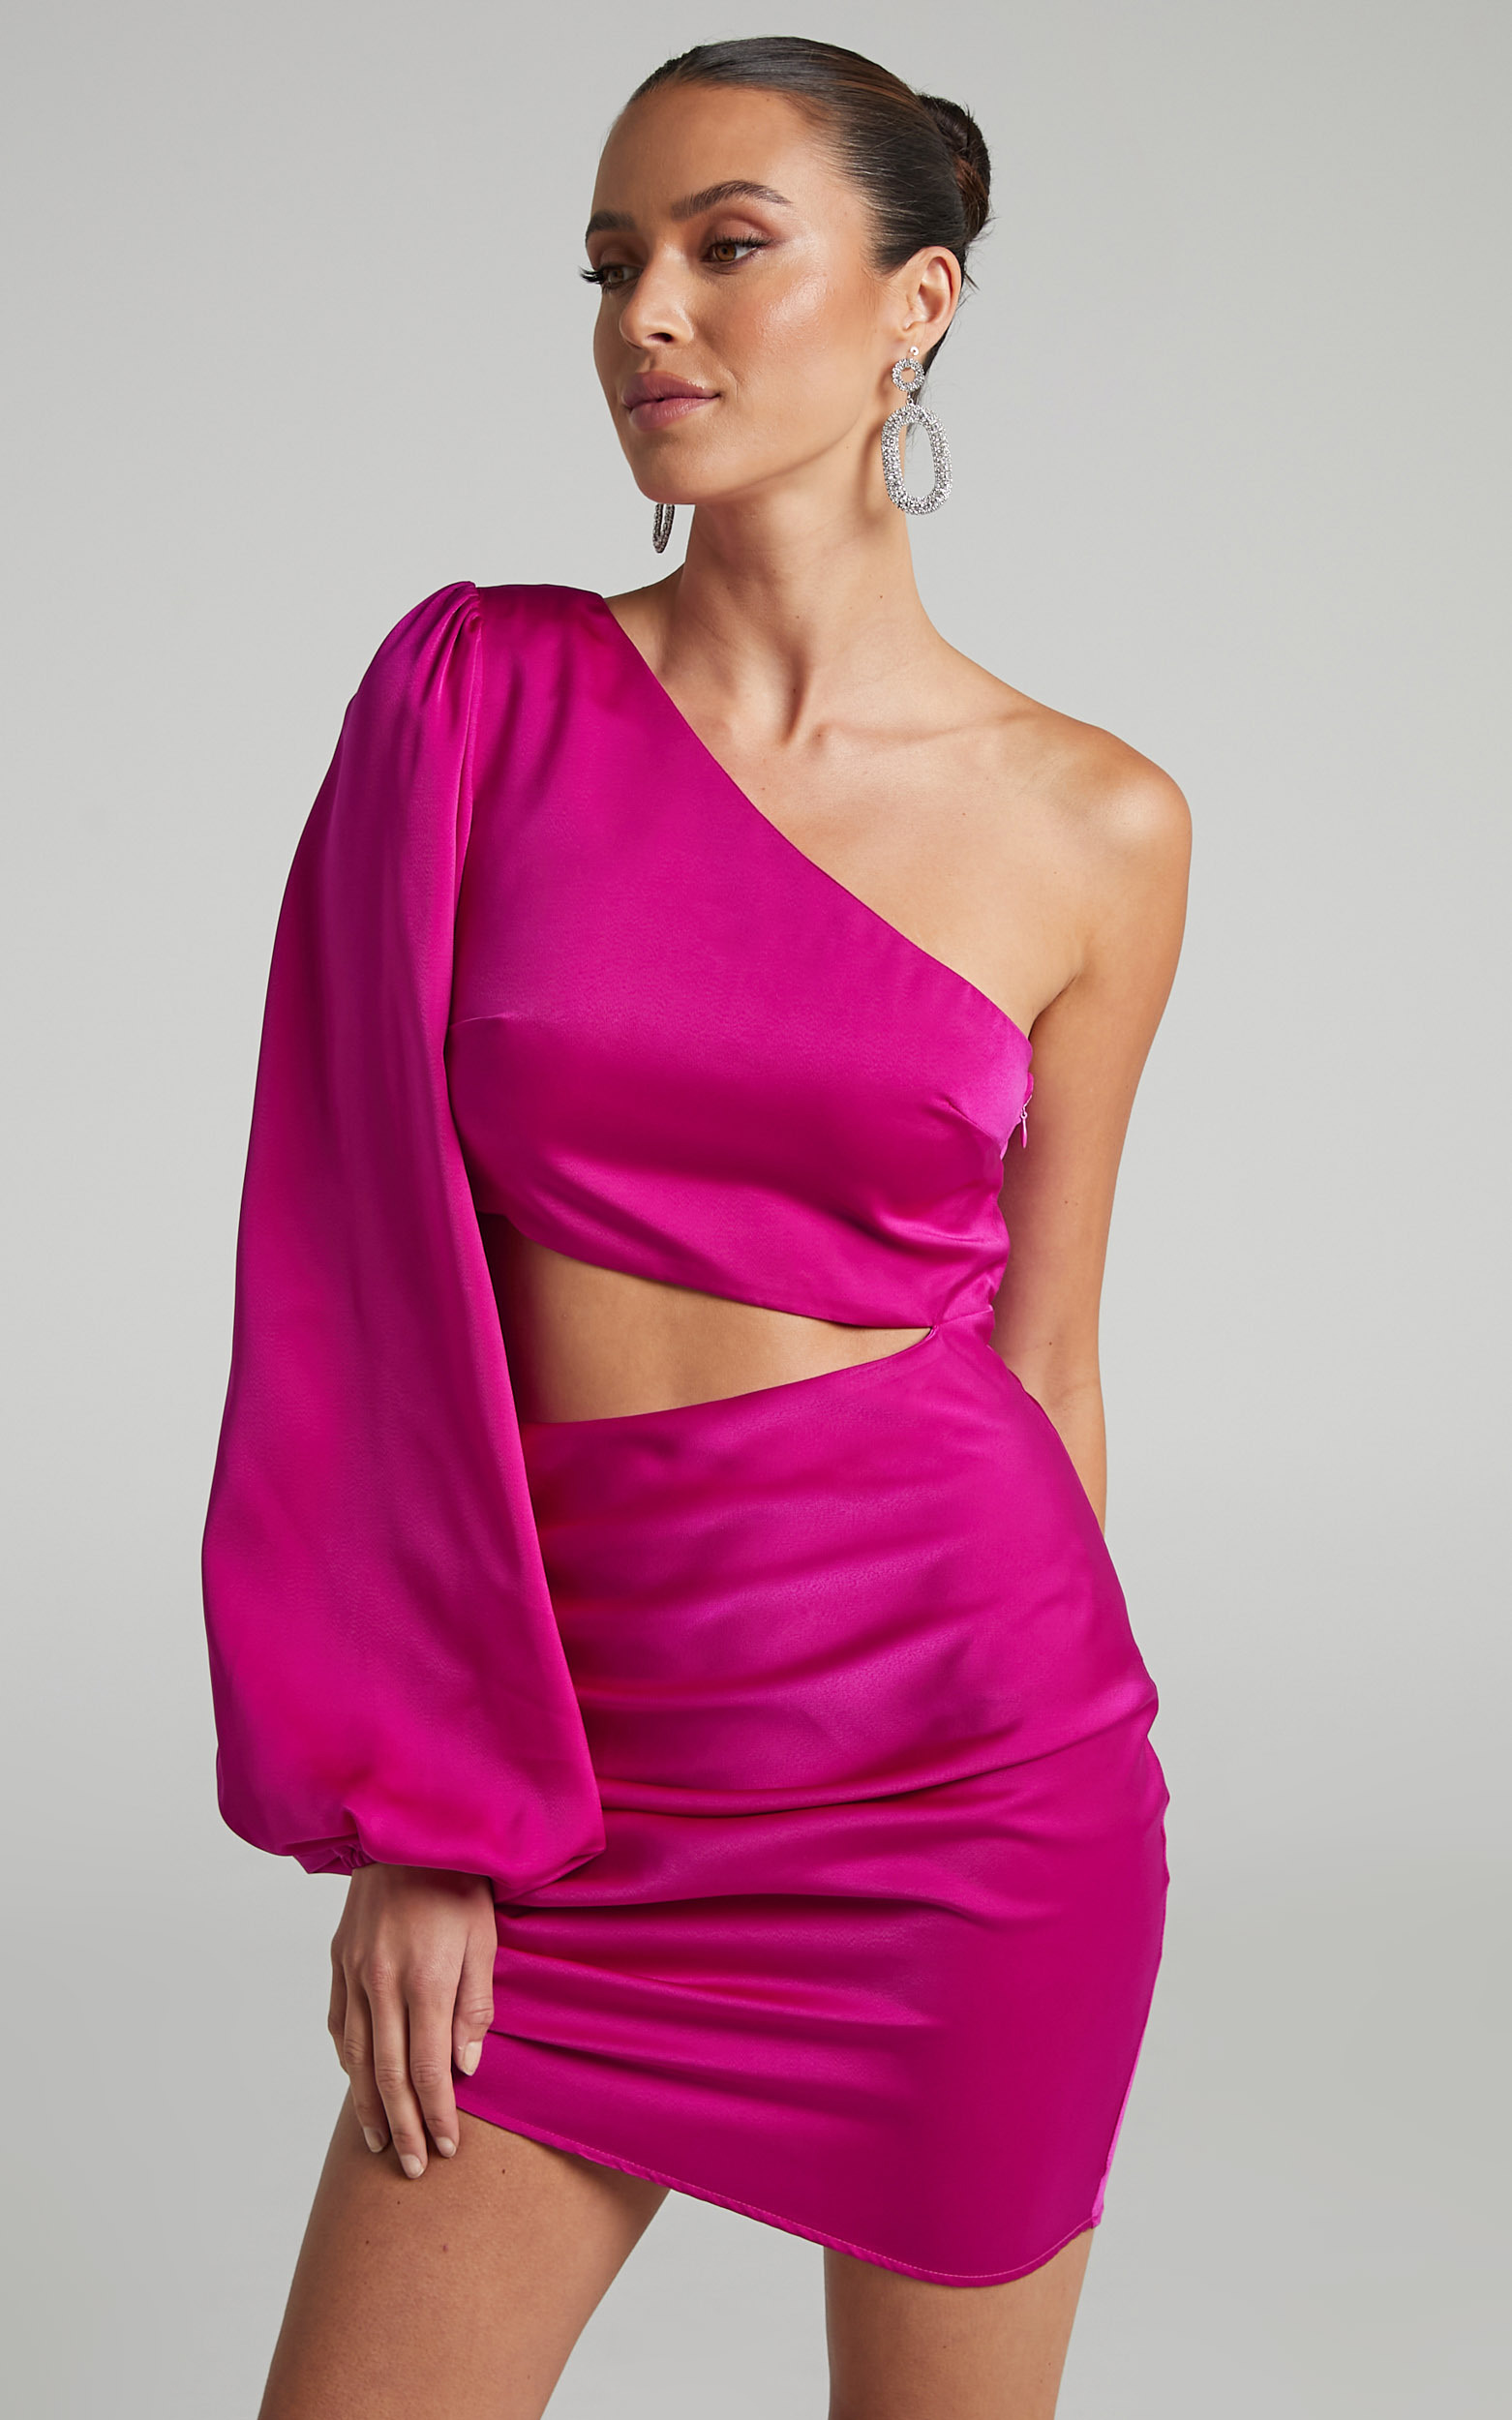 Rayanna One Shoulder Long Sleeve Cut Out Mini Dress in Fuchsia - 06, PNK1, hi-res image number null